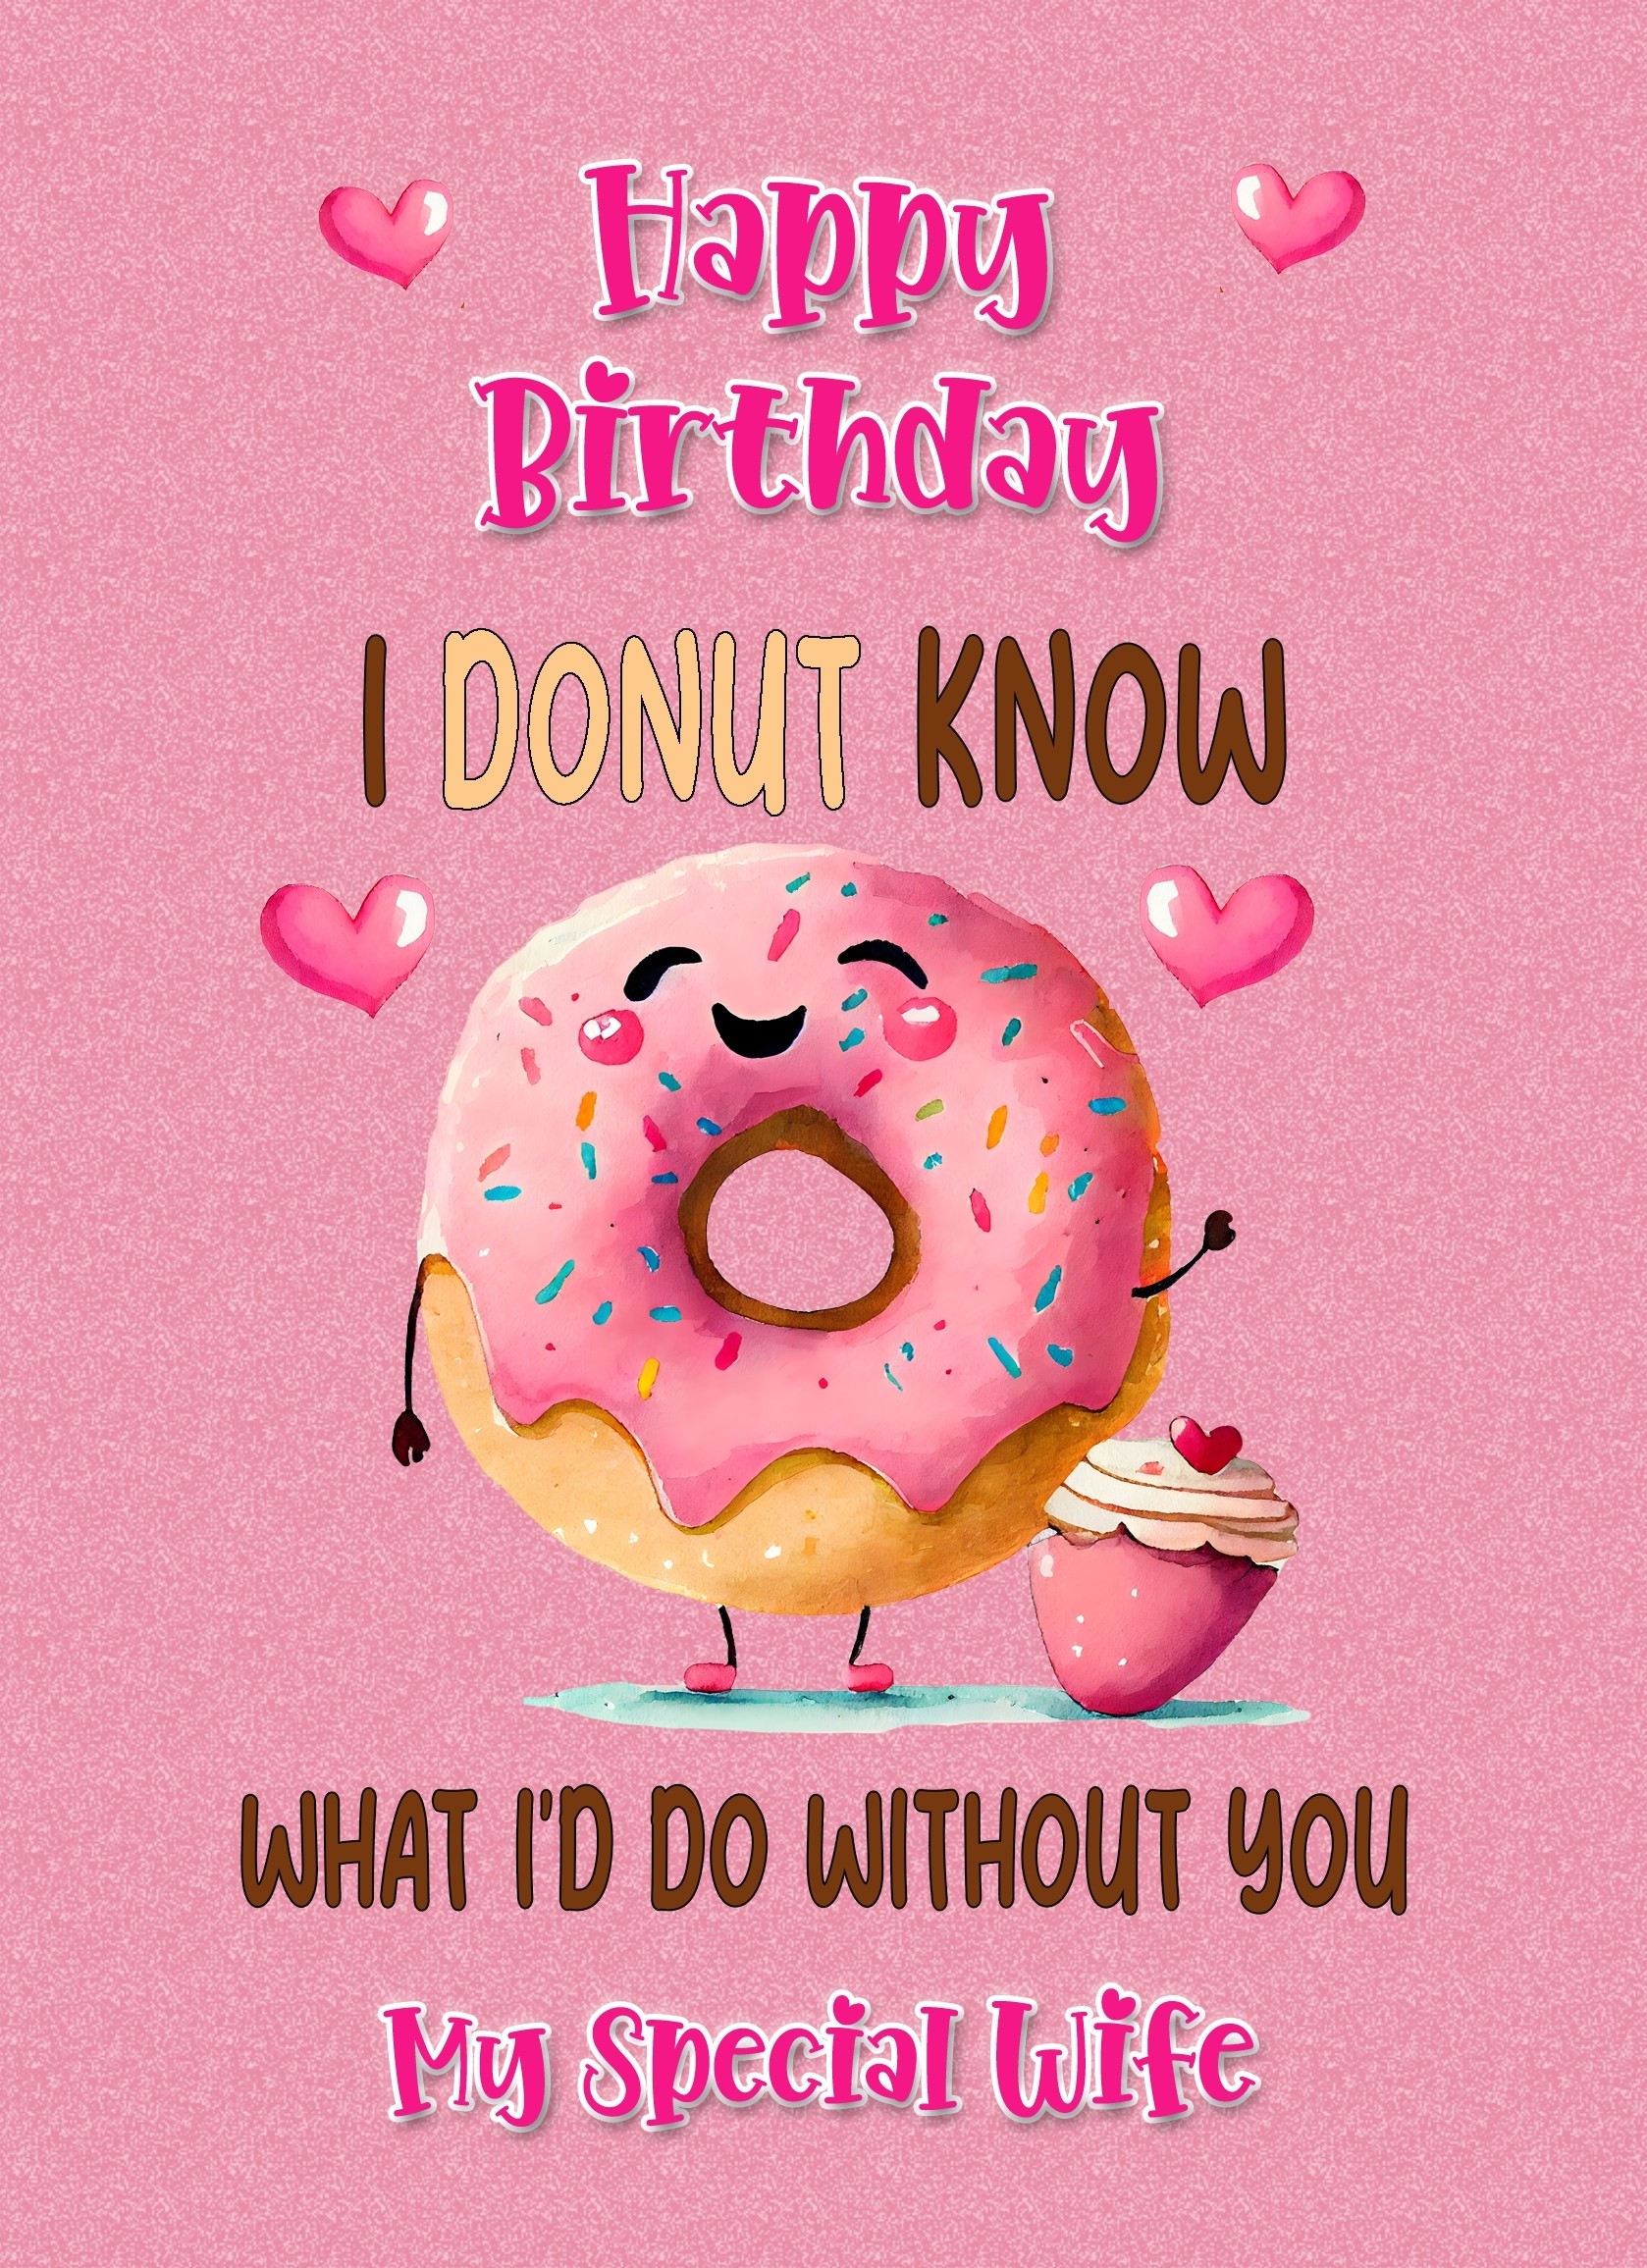 Funny Pun Romantic Birthday Card for Wife (Donut Know)